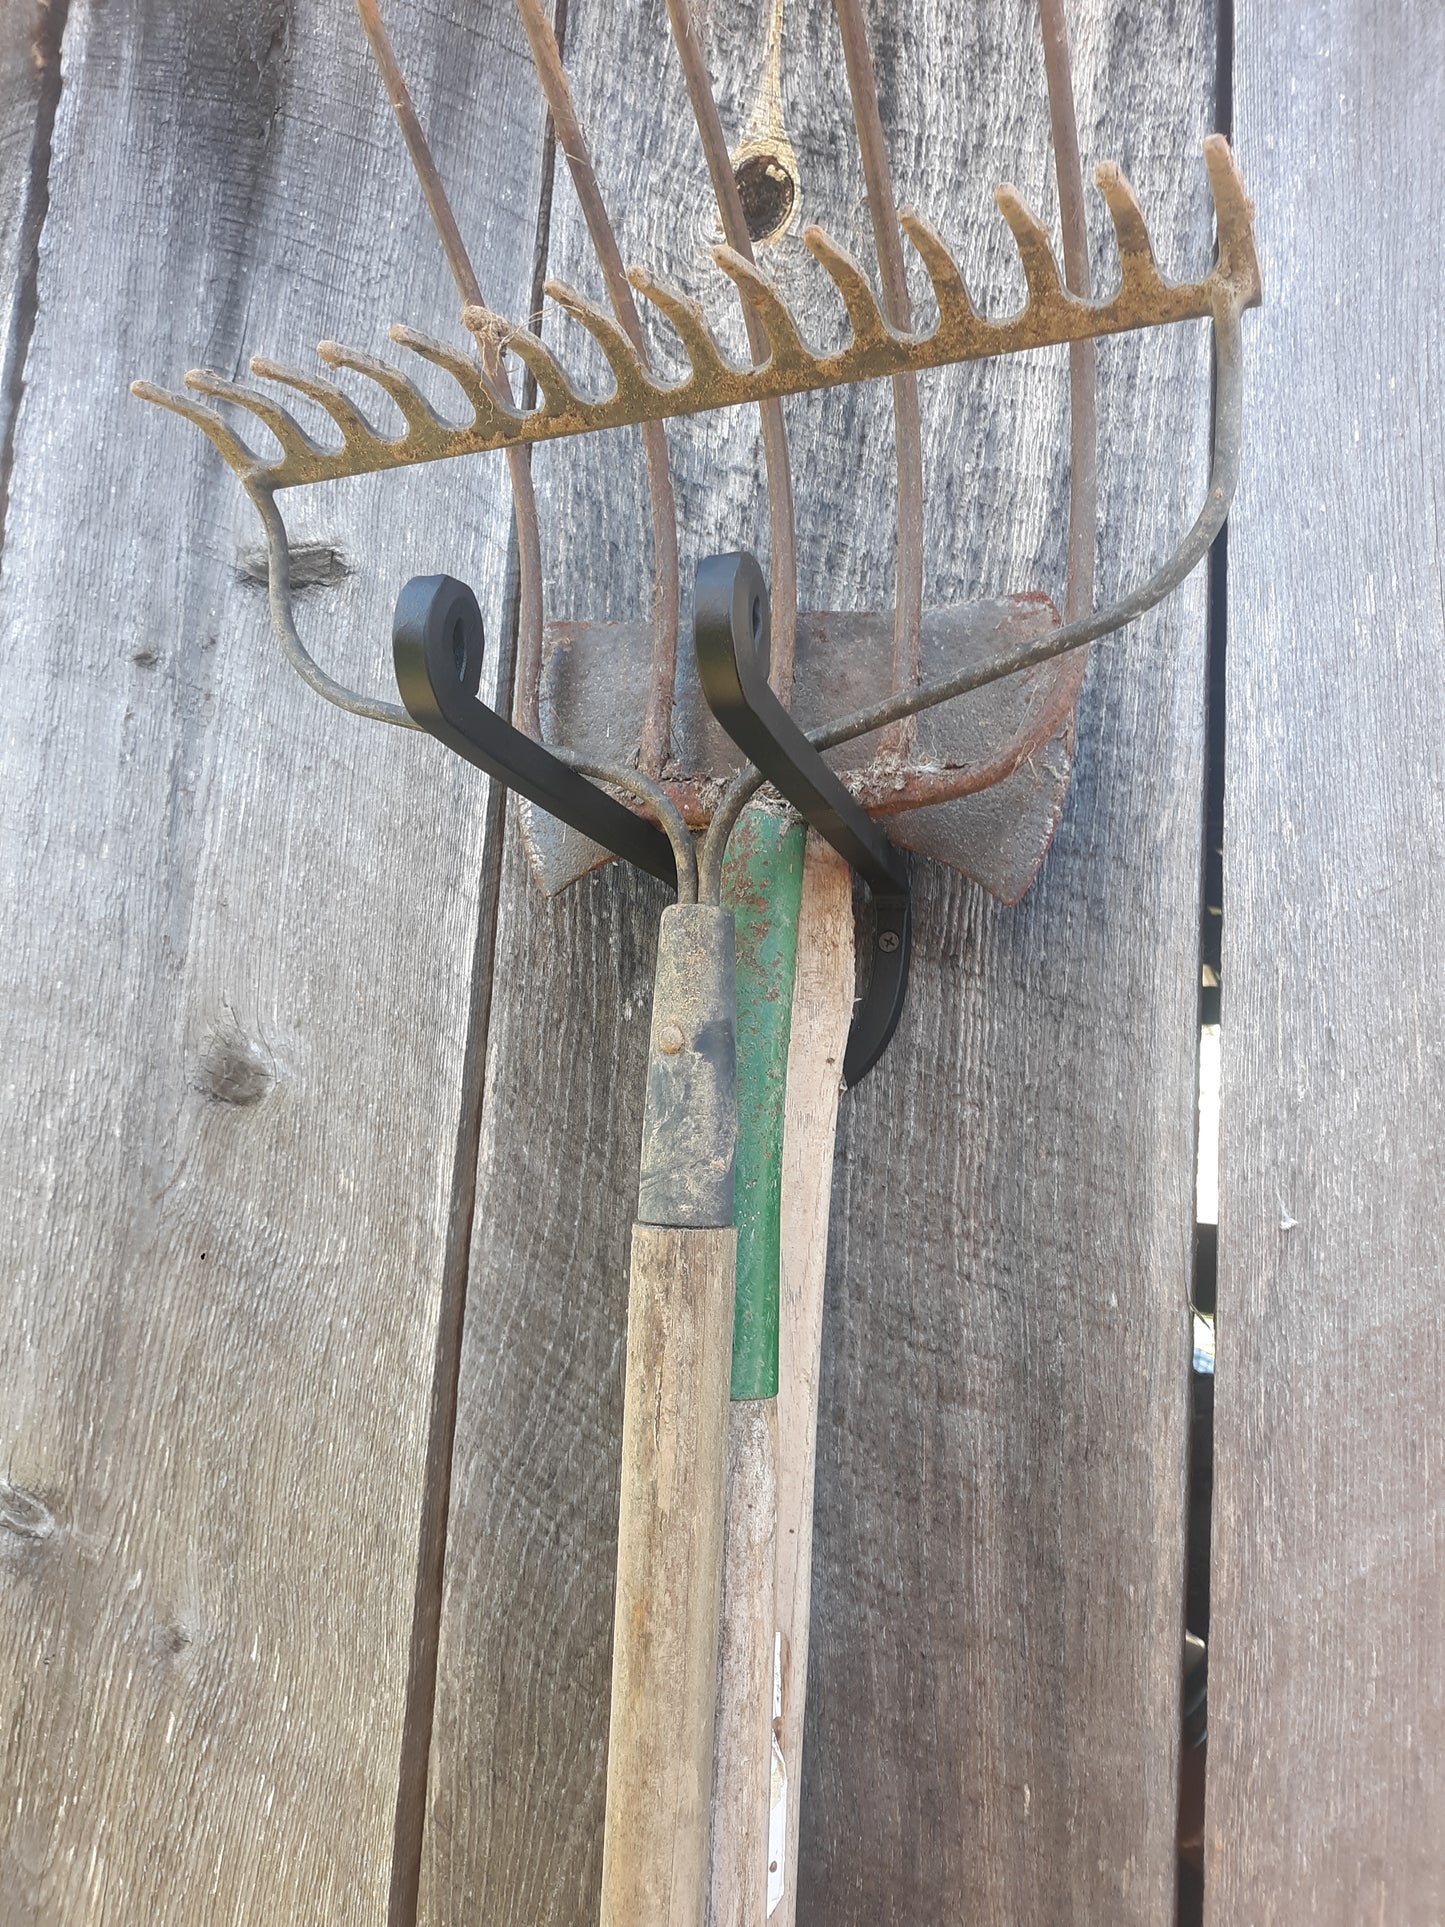 Hand Forged Heavy Duty Tool Holder